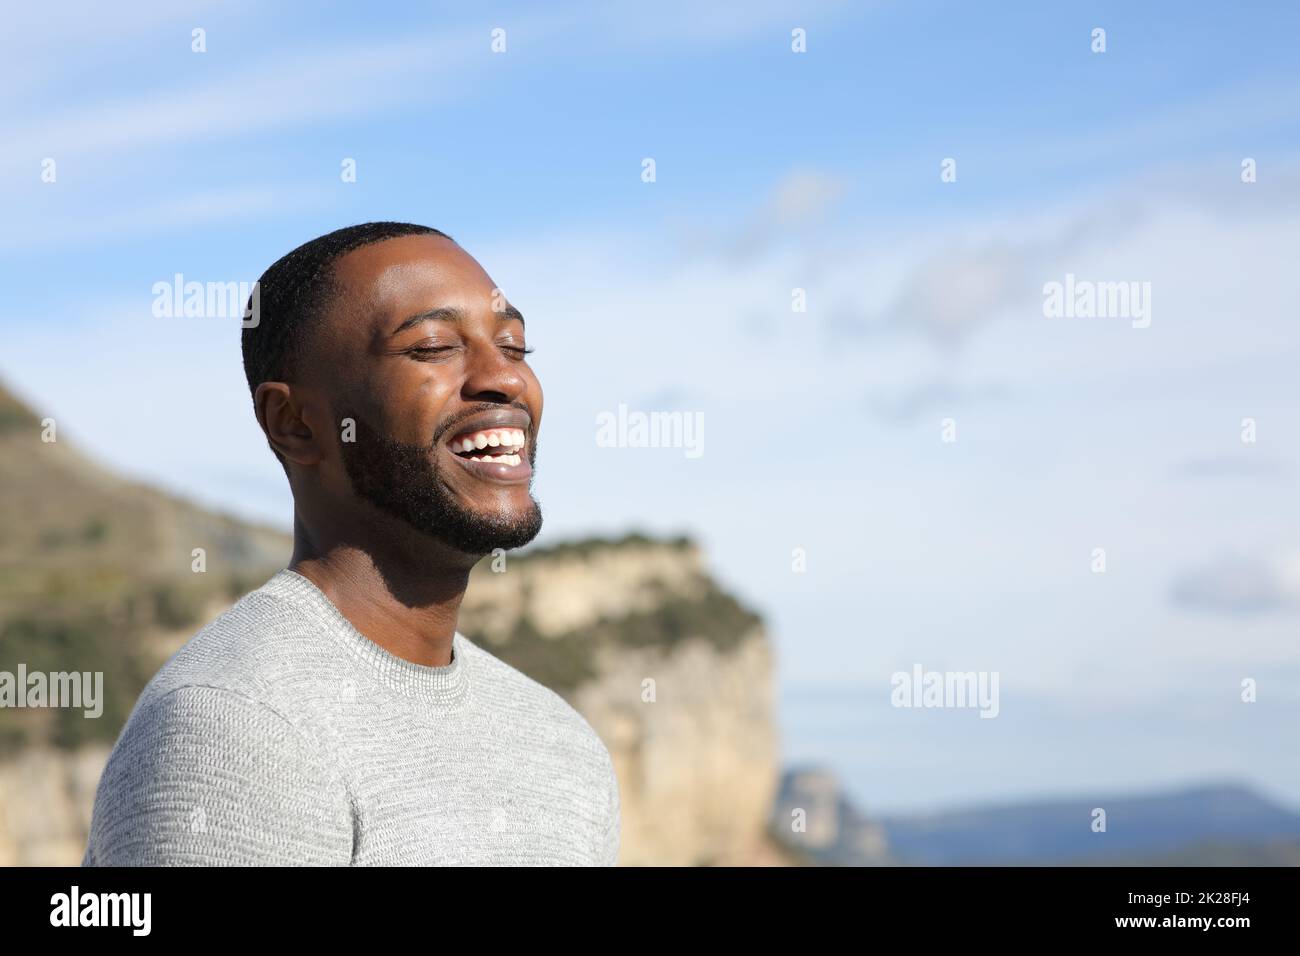 Funny man with black skin laughing outdoors Stock Photo